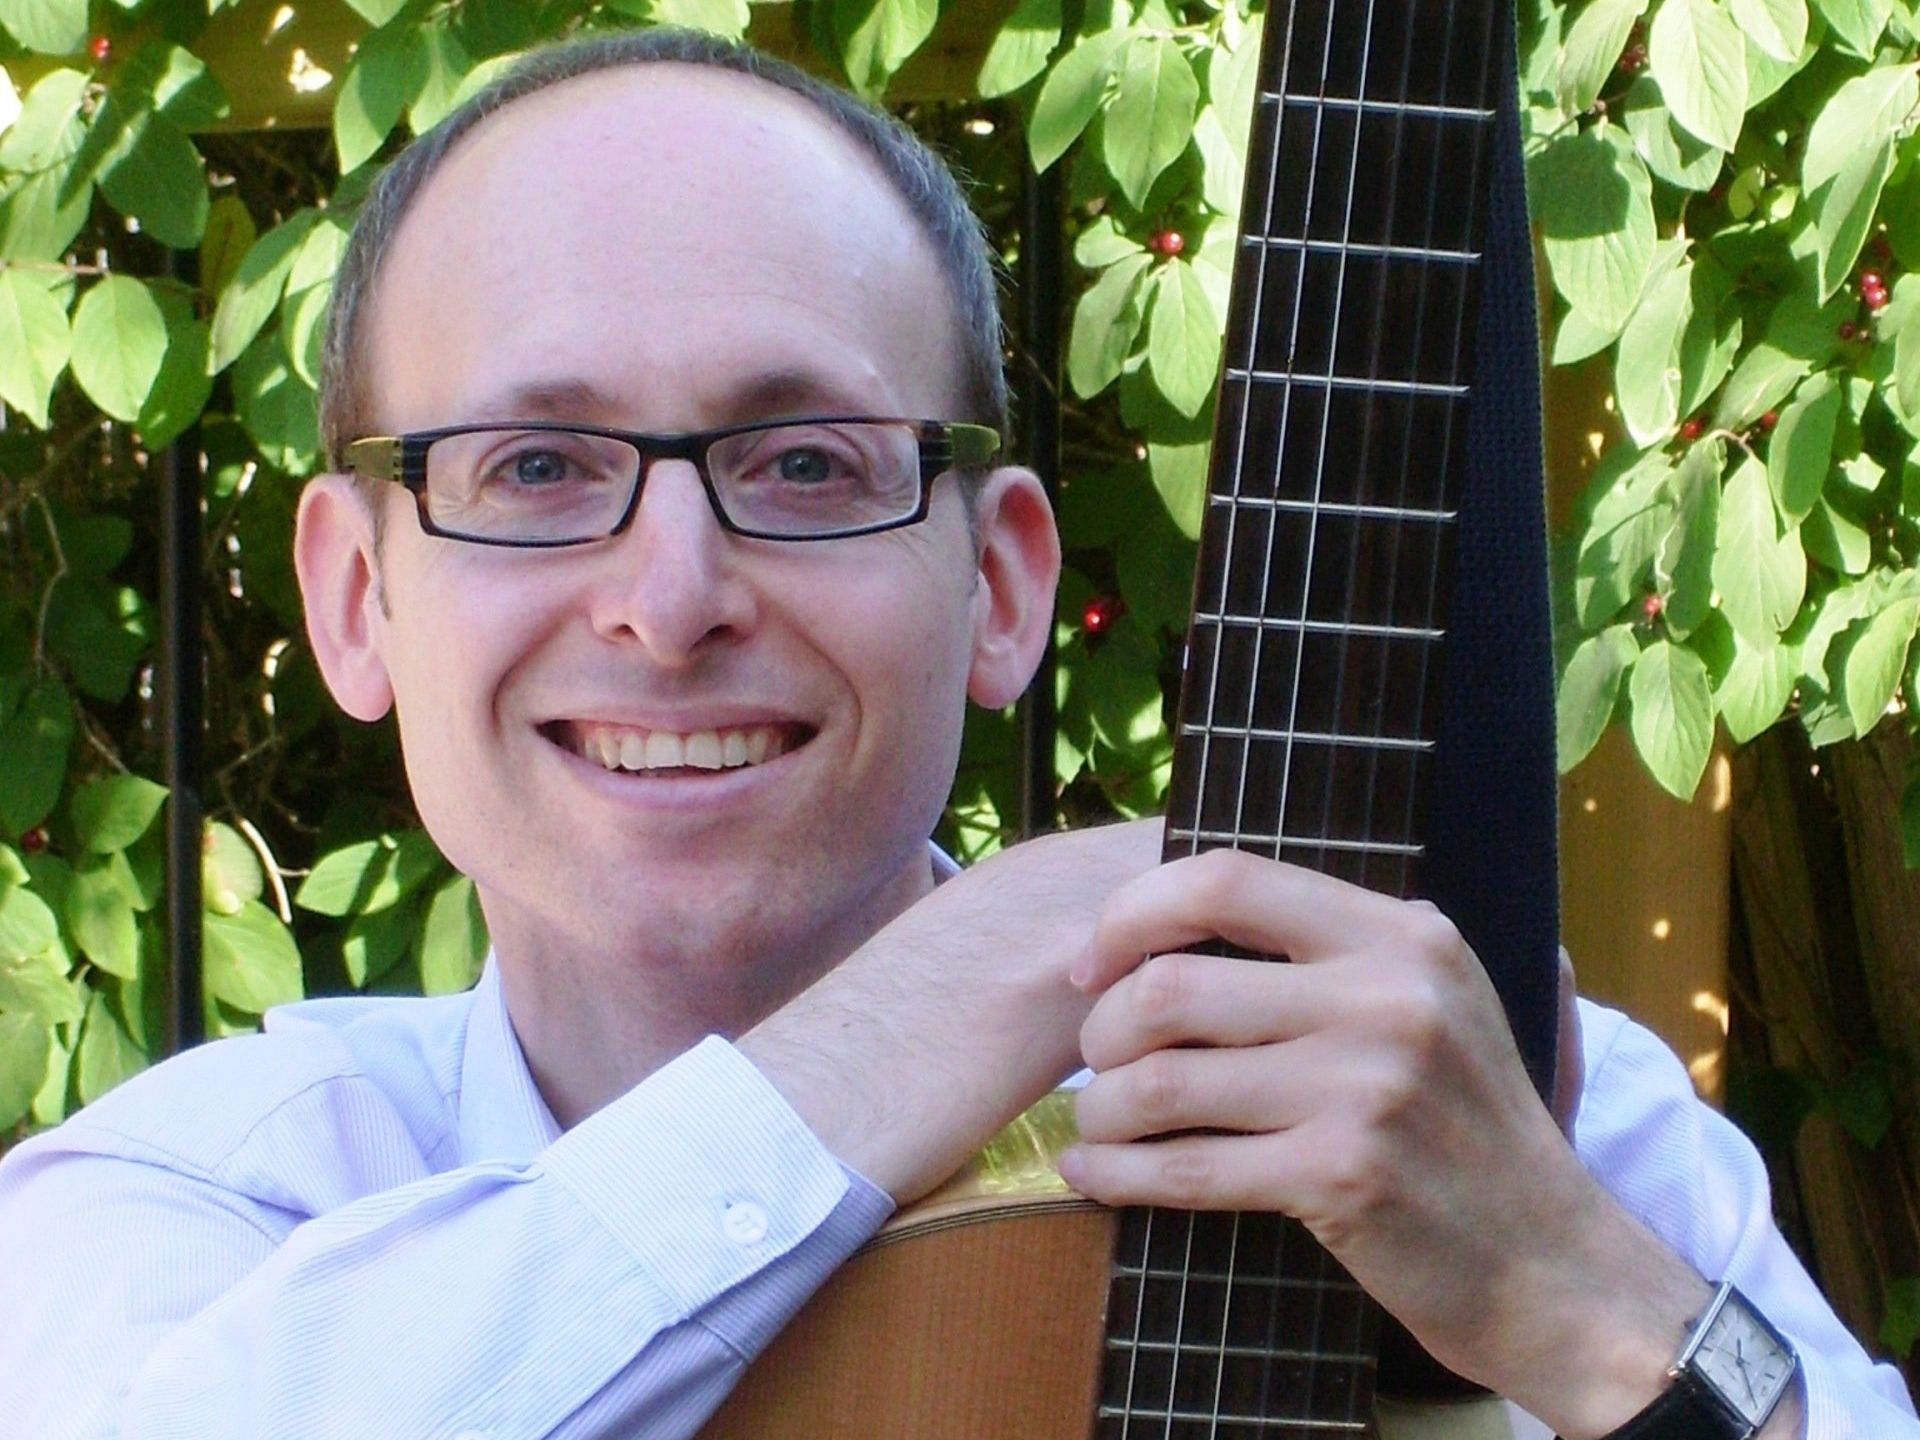 A man wearing glasses is holding a guitar and smiling